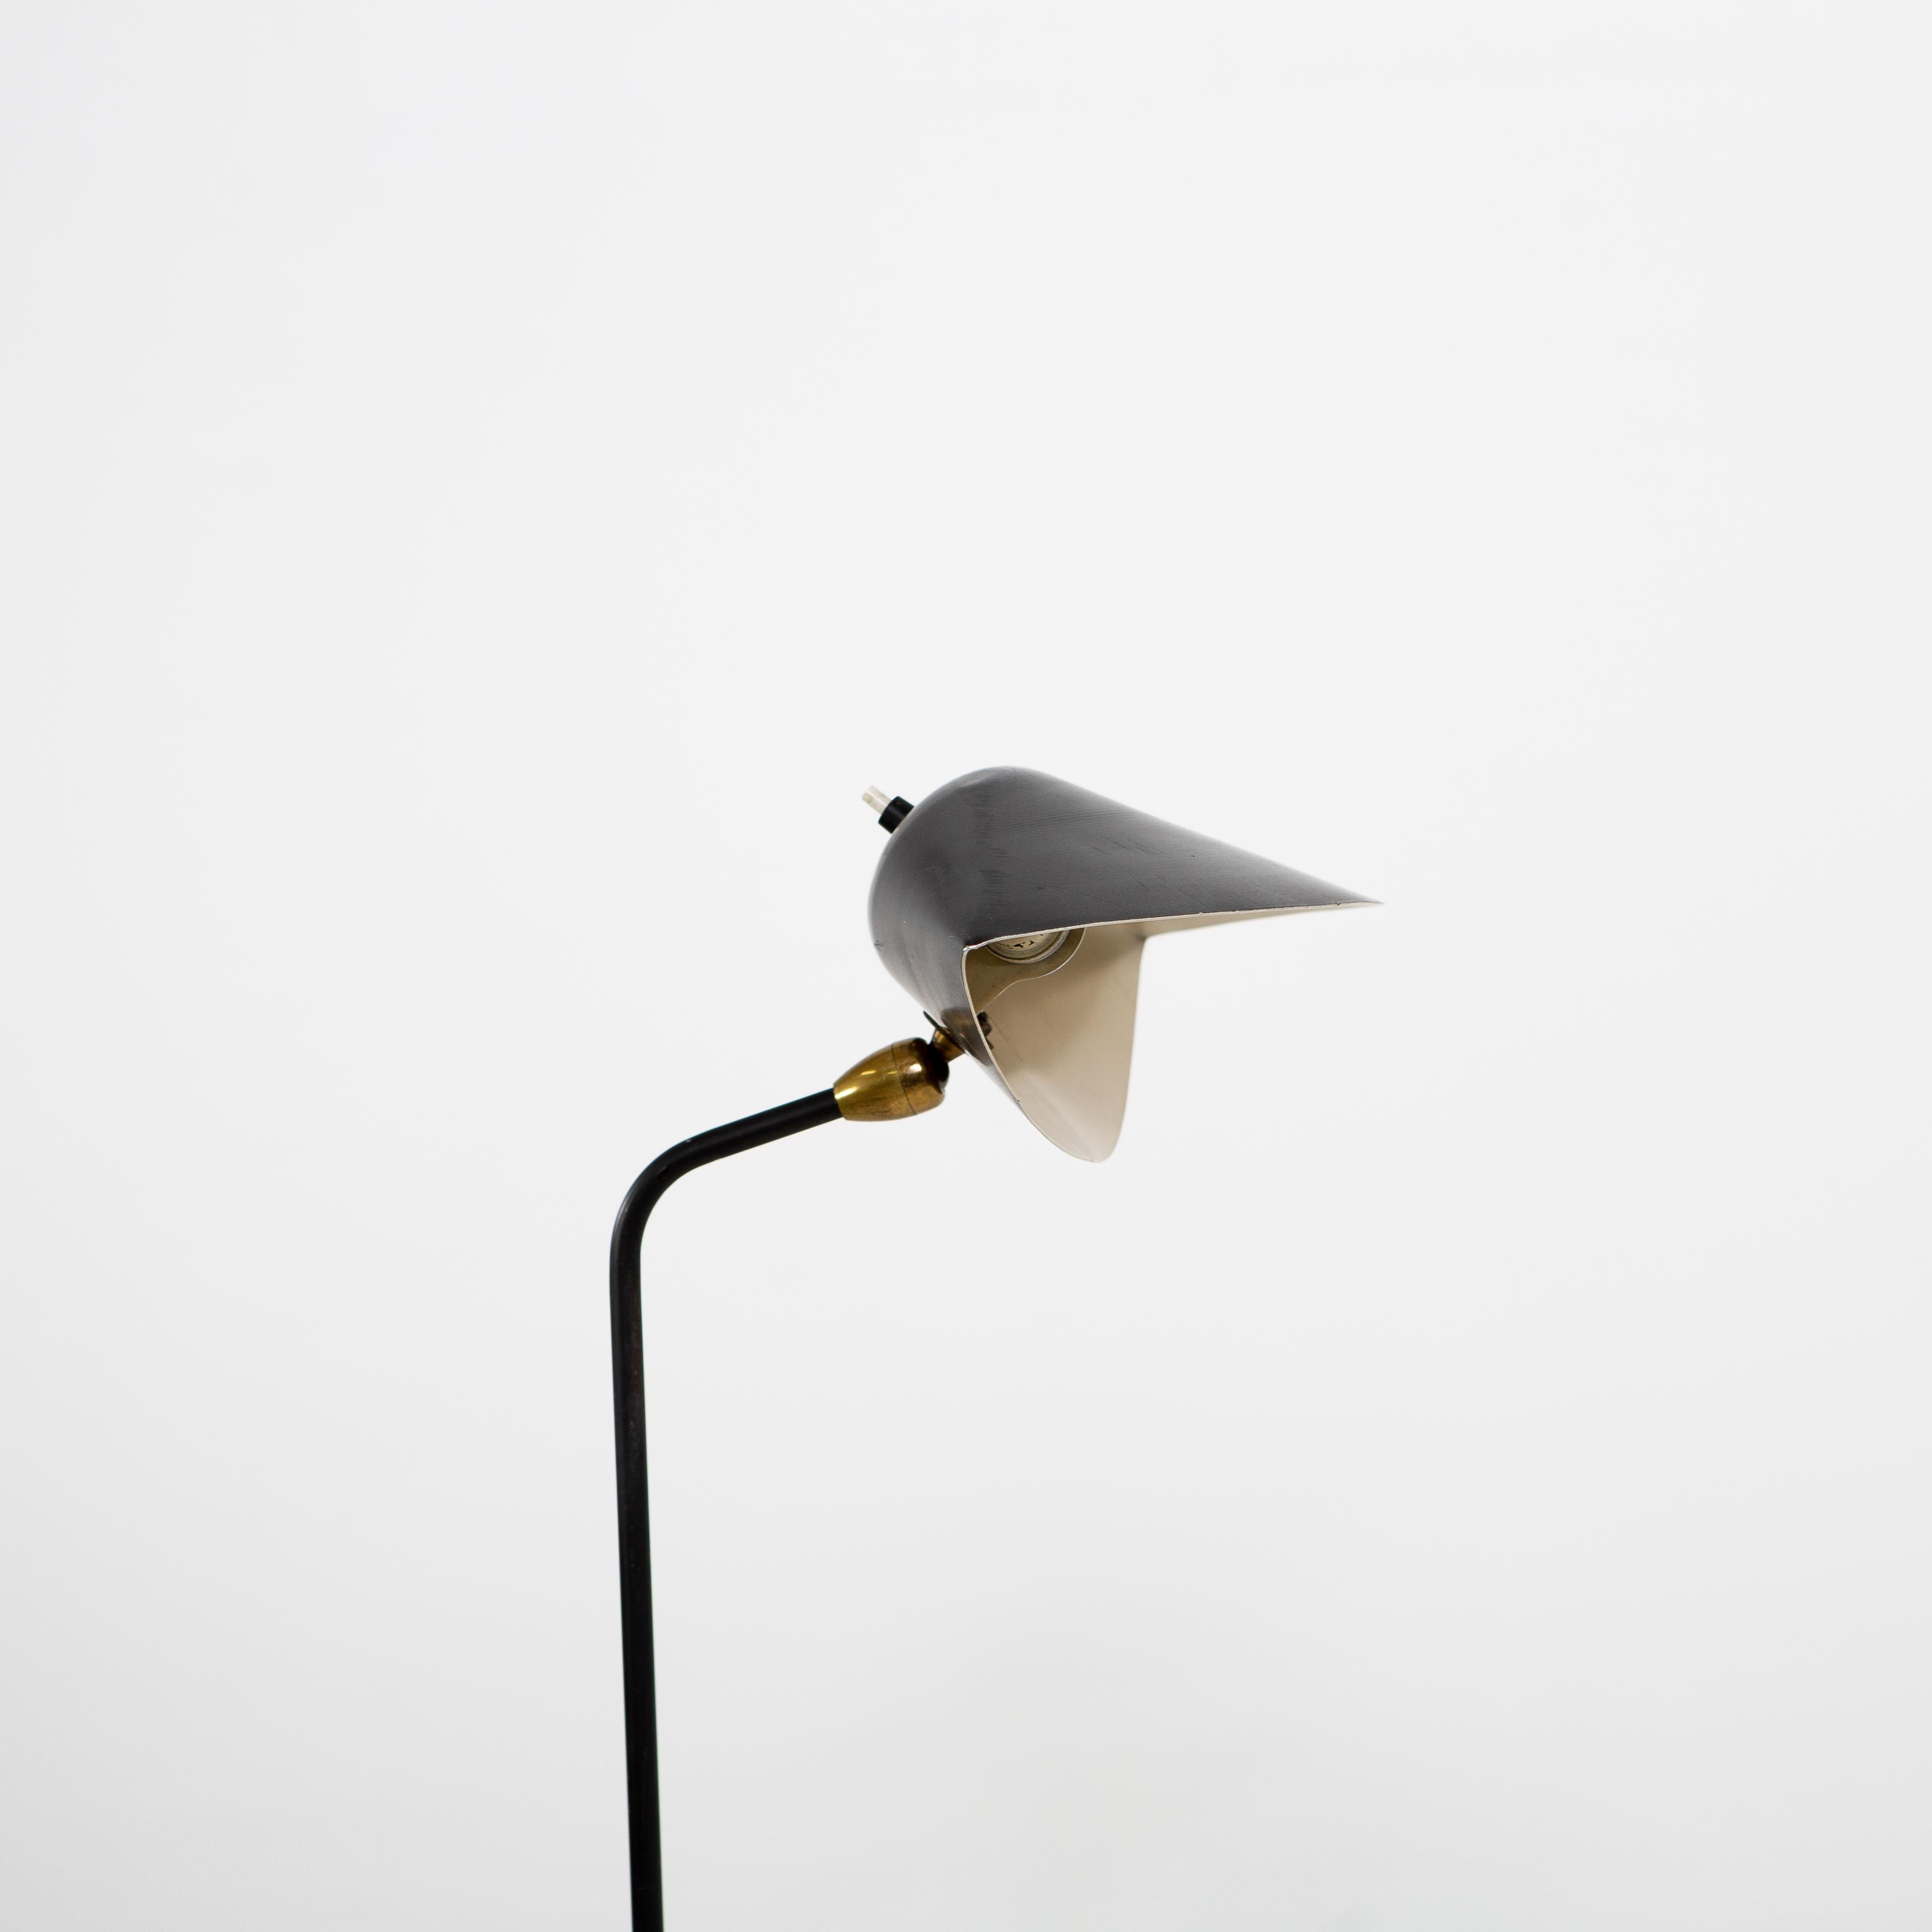 Serge Mouille Agrafée table lamp with clamp fastening and two ball joints. Designed in 1958. Prov.: The lamp comes from a large collection bought in Paris in the 1980s. Cf. lit.: Pierre Émile Pralus: Serge Mouille - un classique français, Saint Cyr